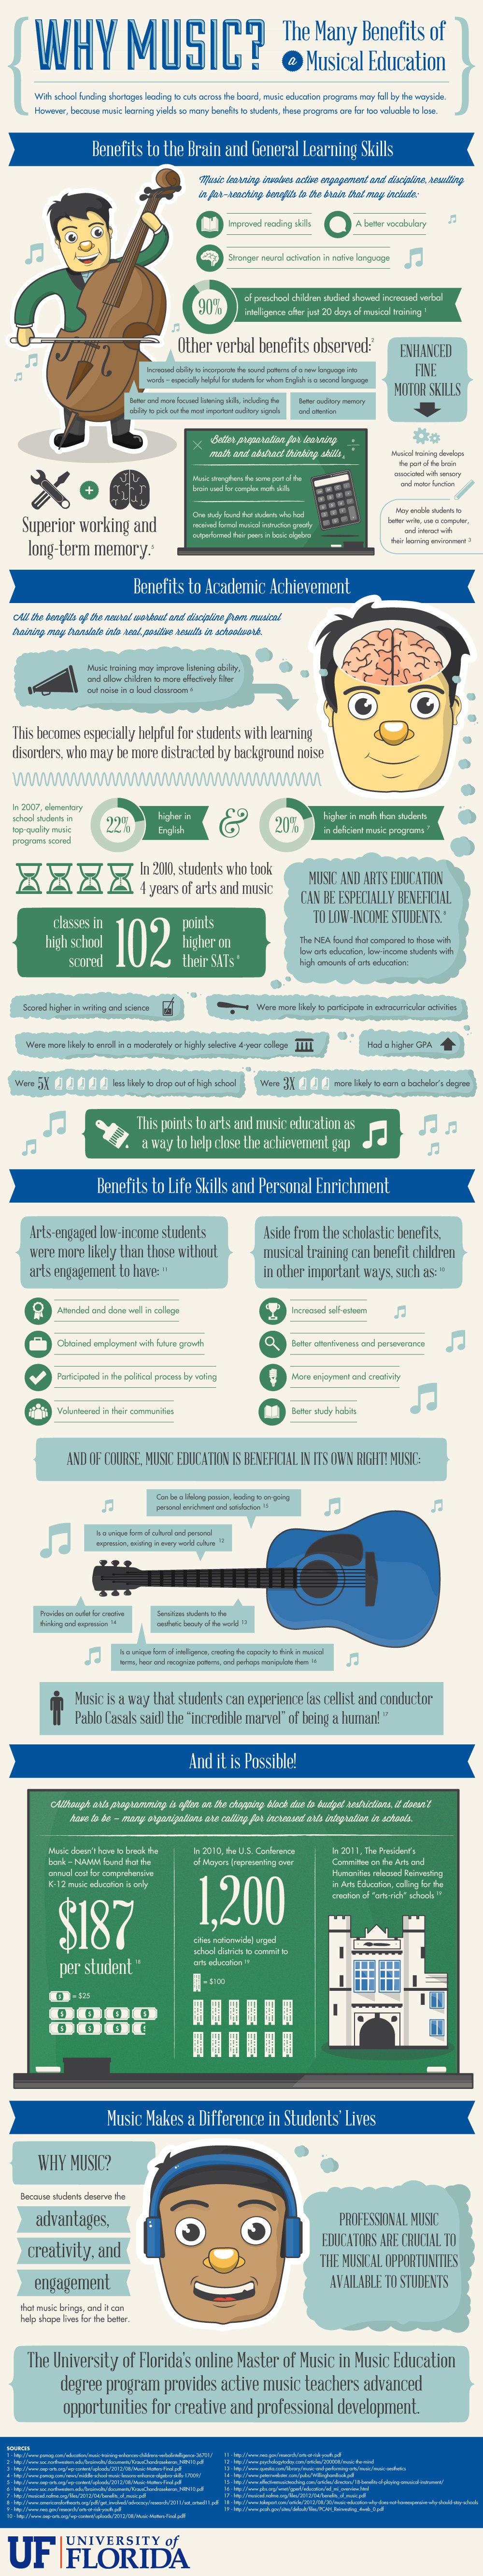 The Benefits of Music Education Infographic